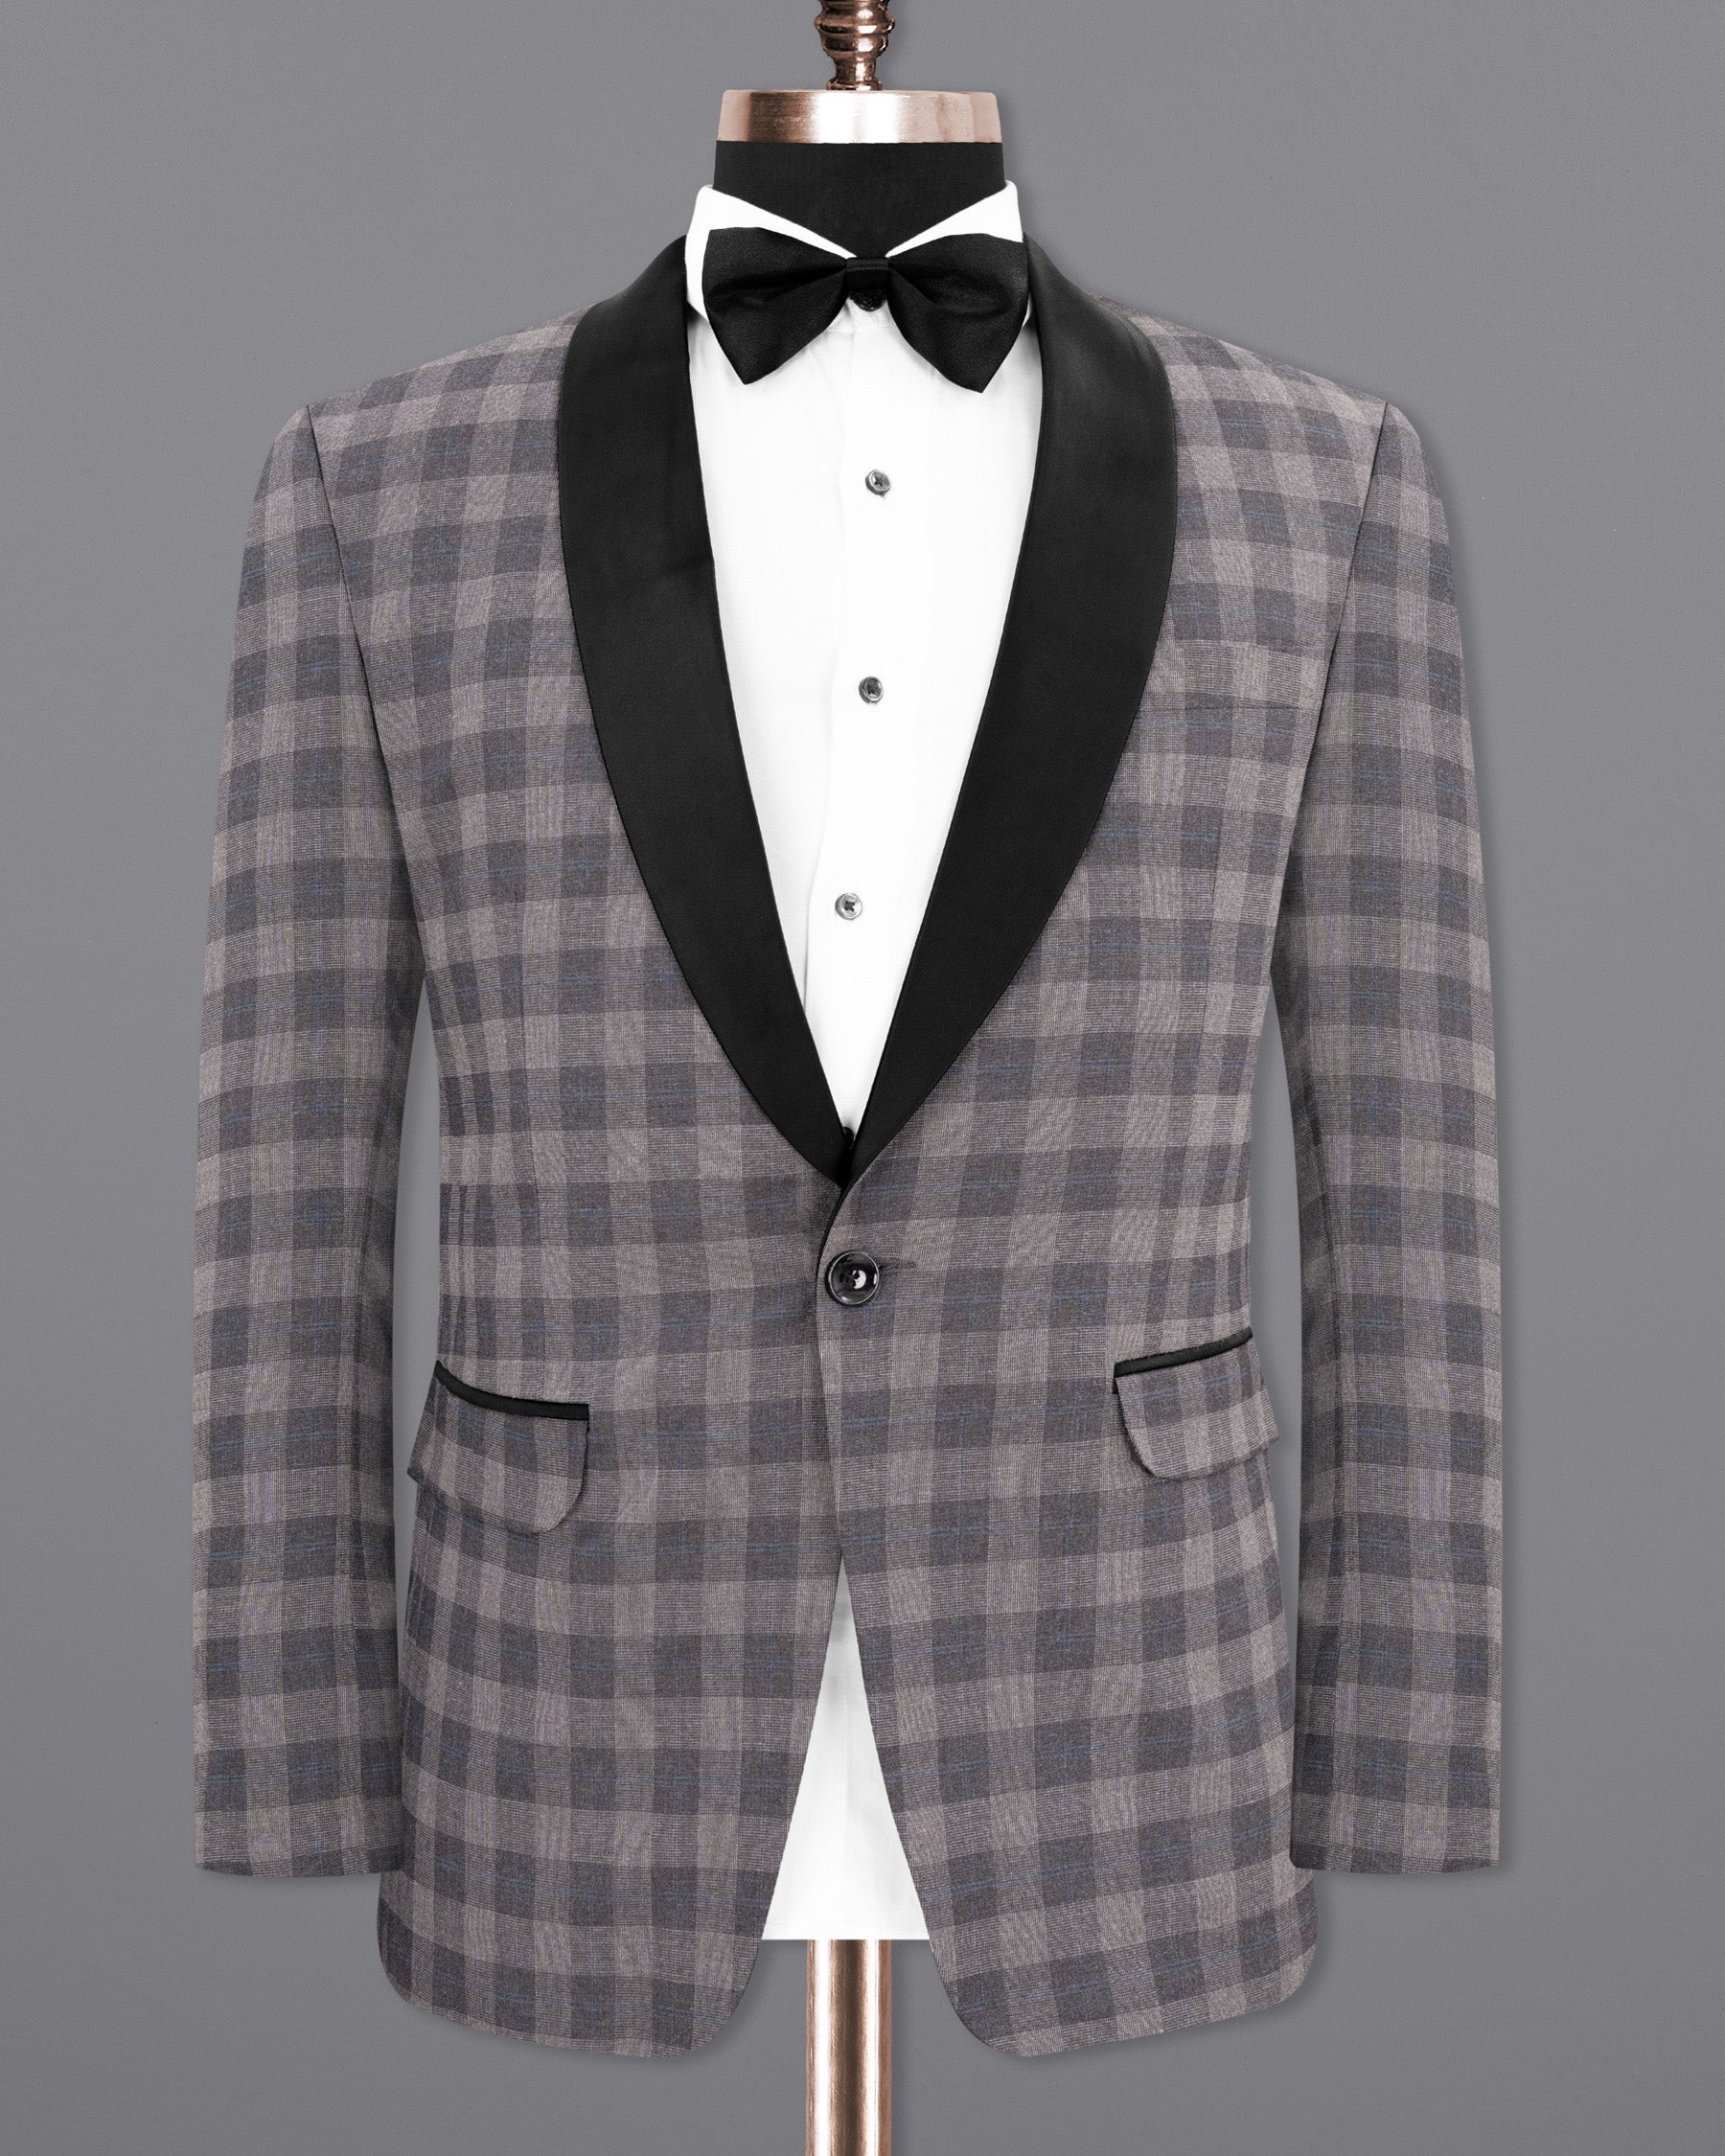 Nobel and Chicago Grey Plaid Wool Rich Tuxedo Blazer BL1455-BKL-36,BL1455-BKL-38,BL1455-BKL-40,BL1455-BKL-42,BL1455-BKL-44,BL1455-BKL-46,BL1455-BKL-48,BL1455-BKL-50,BL1455-BKL-52,BL1455-BKL-54,BL1455-BKL-56,BL1455-BKL-58,BL1455-BKL-60